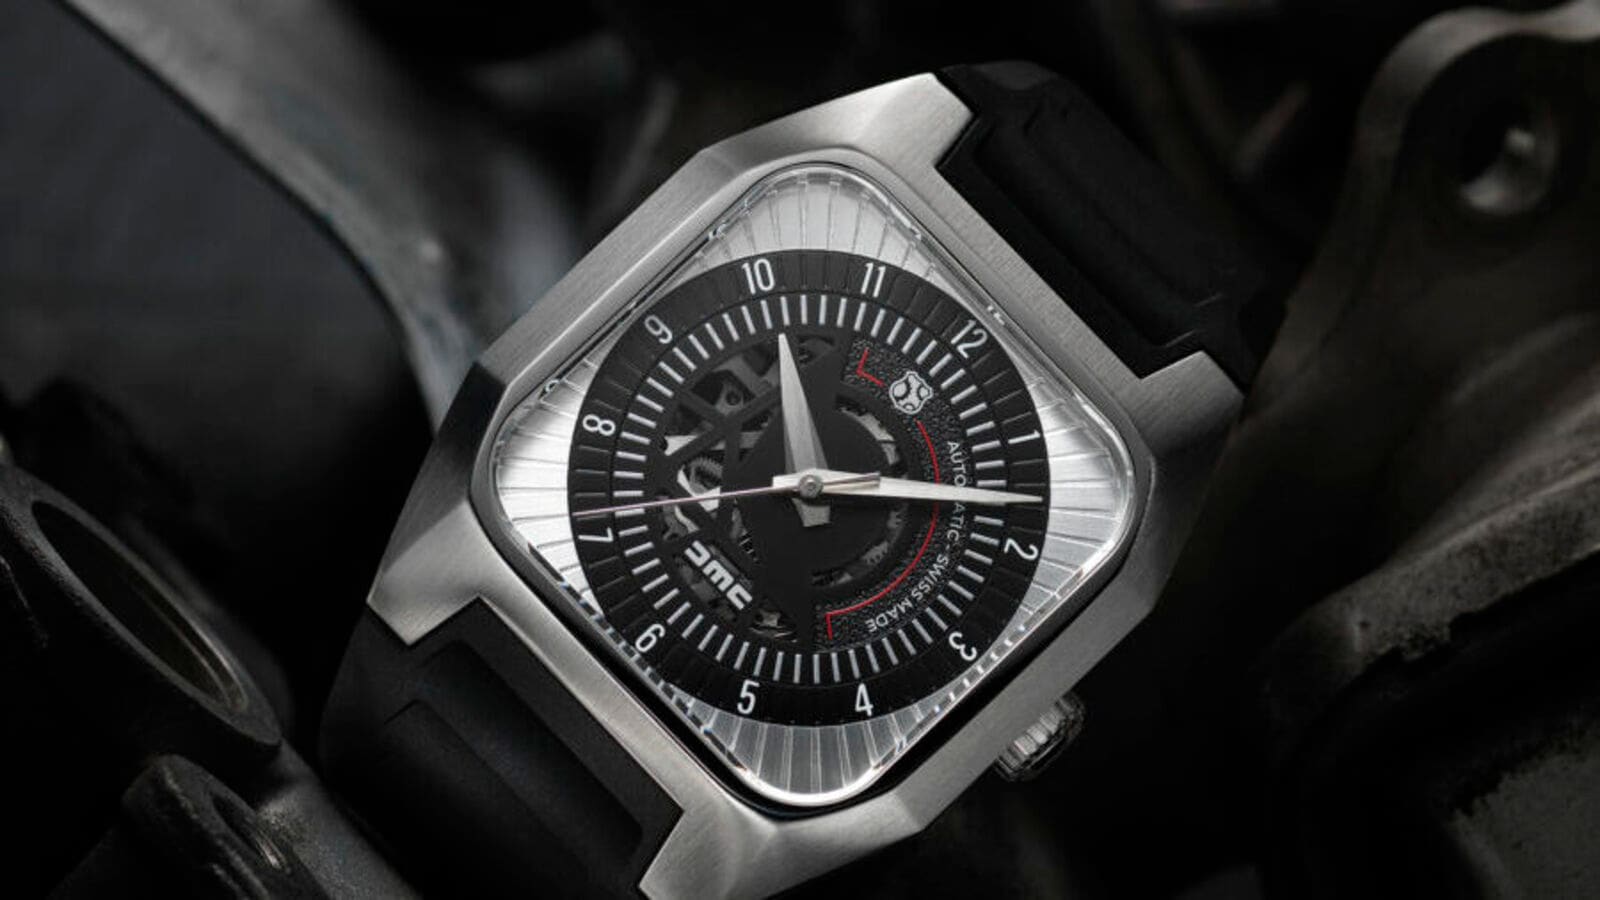 Remember Back to the Future? This watch made from DeLorean's DMC-12 car ...